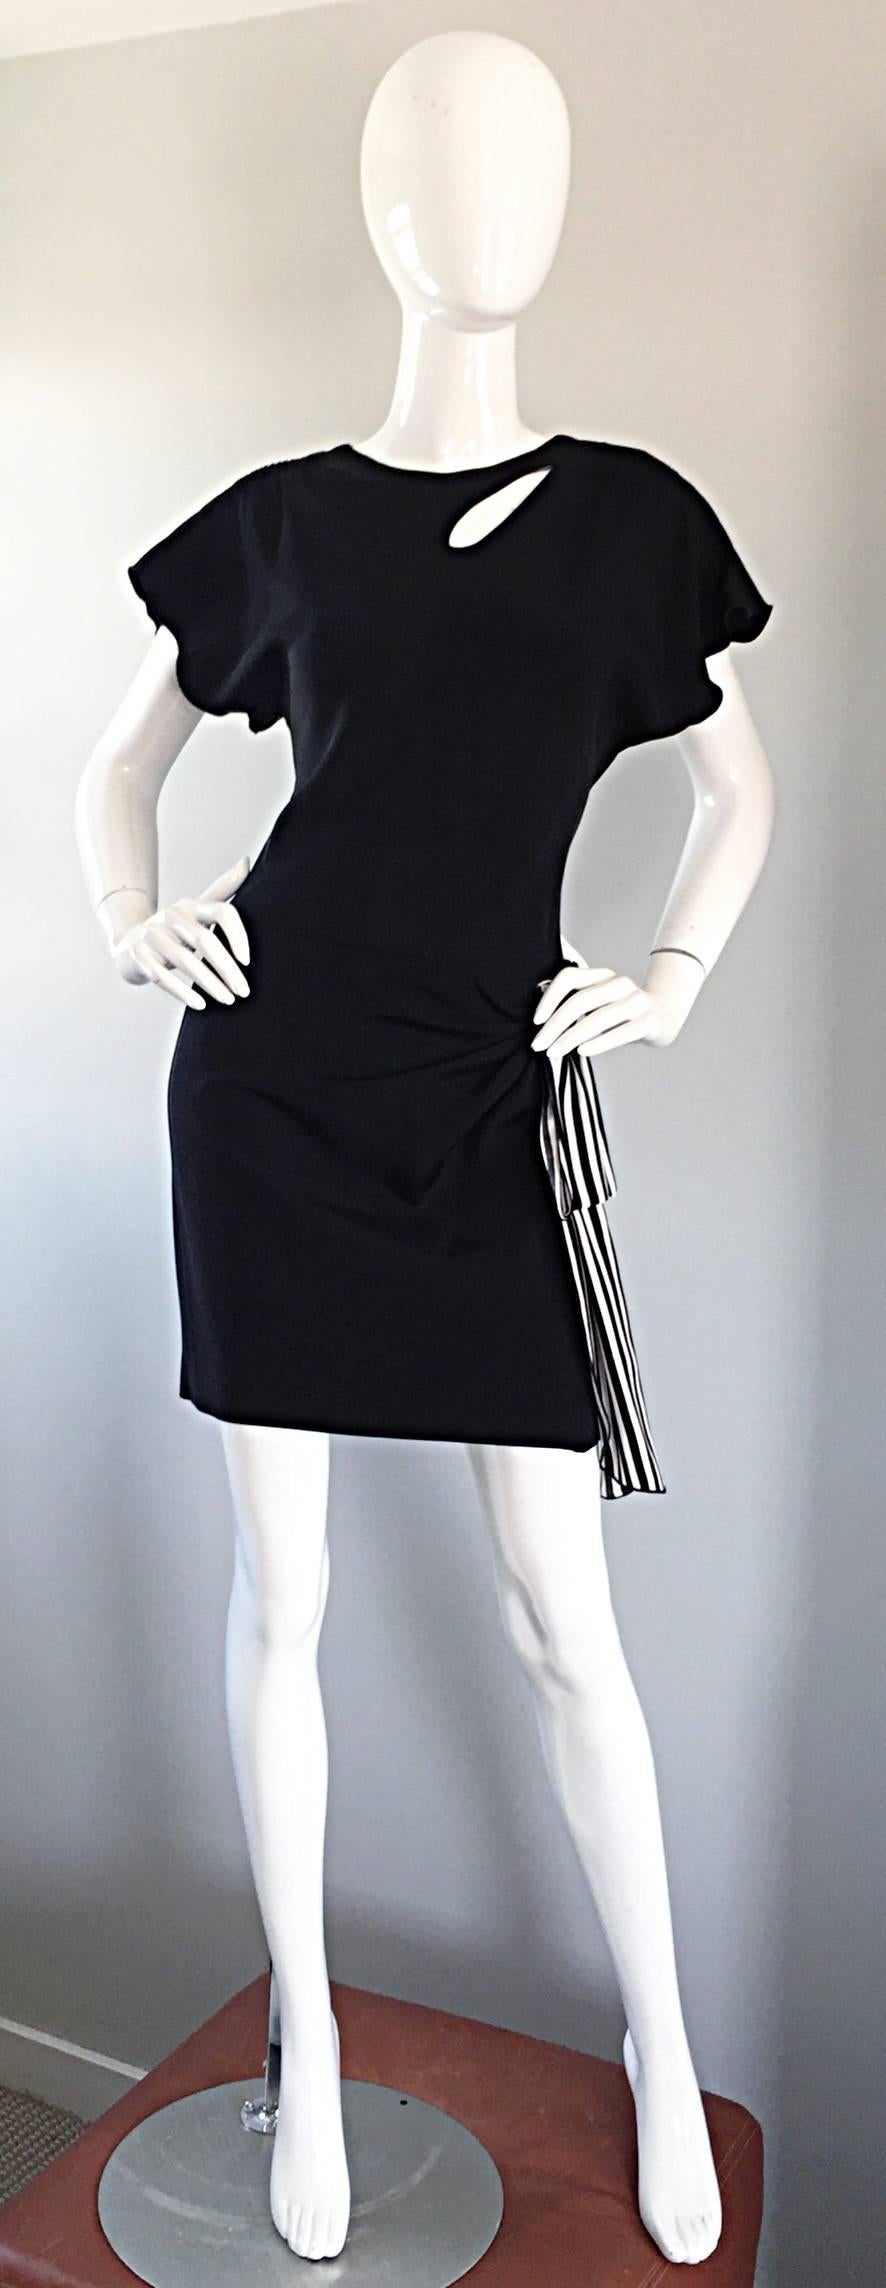 Avant Garde vintage HOLLY'S HARP black silk jersey dress! Features cut-out detail at top left bodice. Flattering gathers at waist, with a black and white silk strip, adorned with a beaded flower applique. Chic dolman sleeves make this beauty easy to